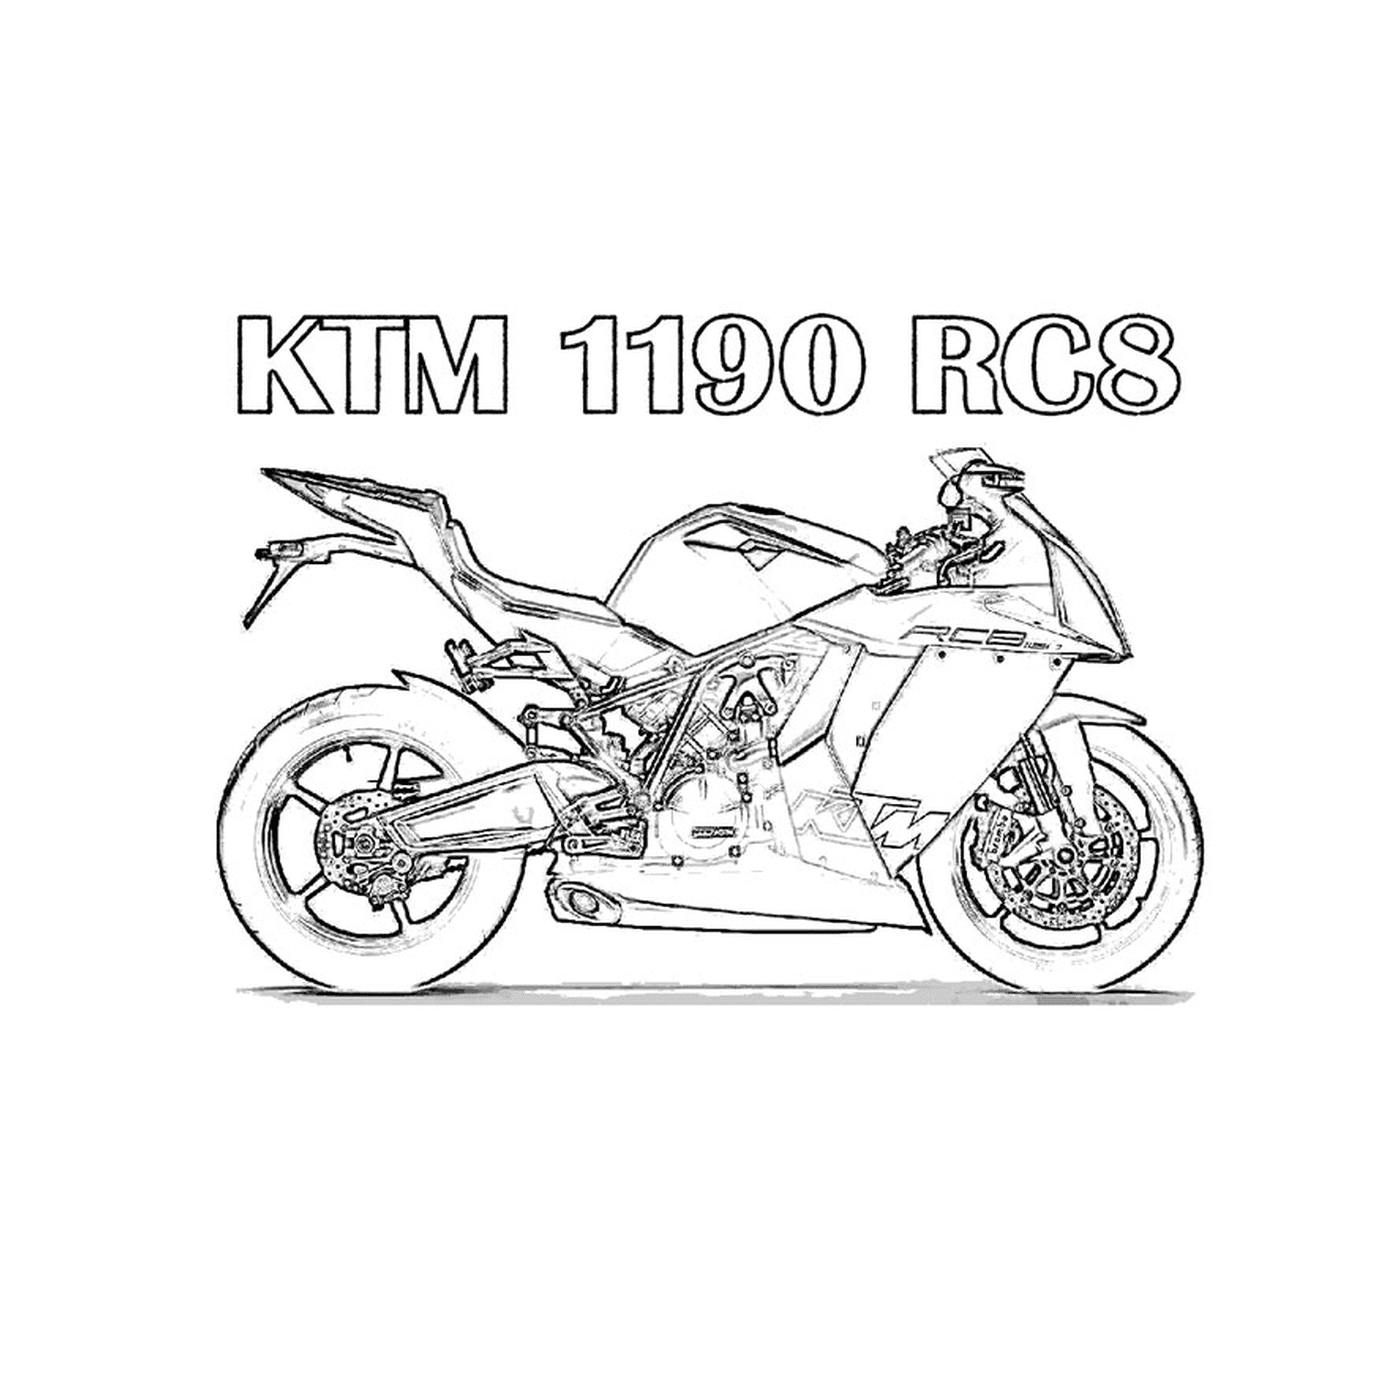  ktm motorcycle in black and white 